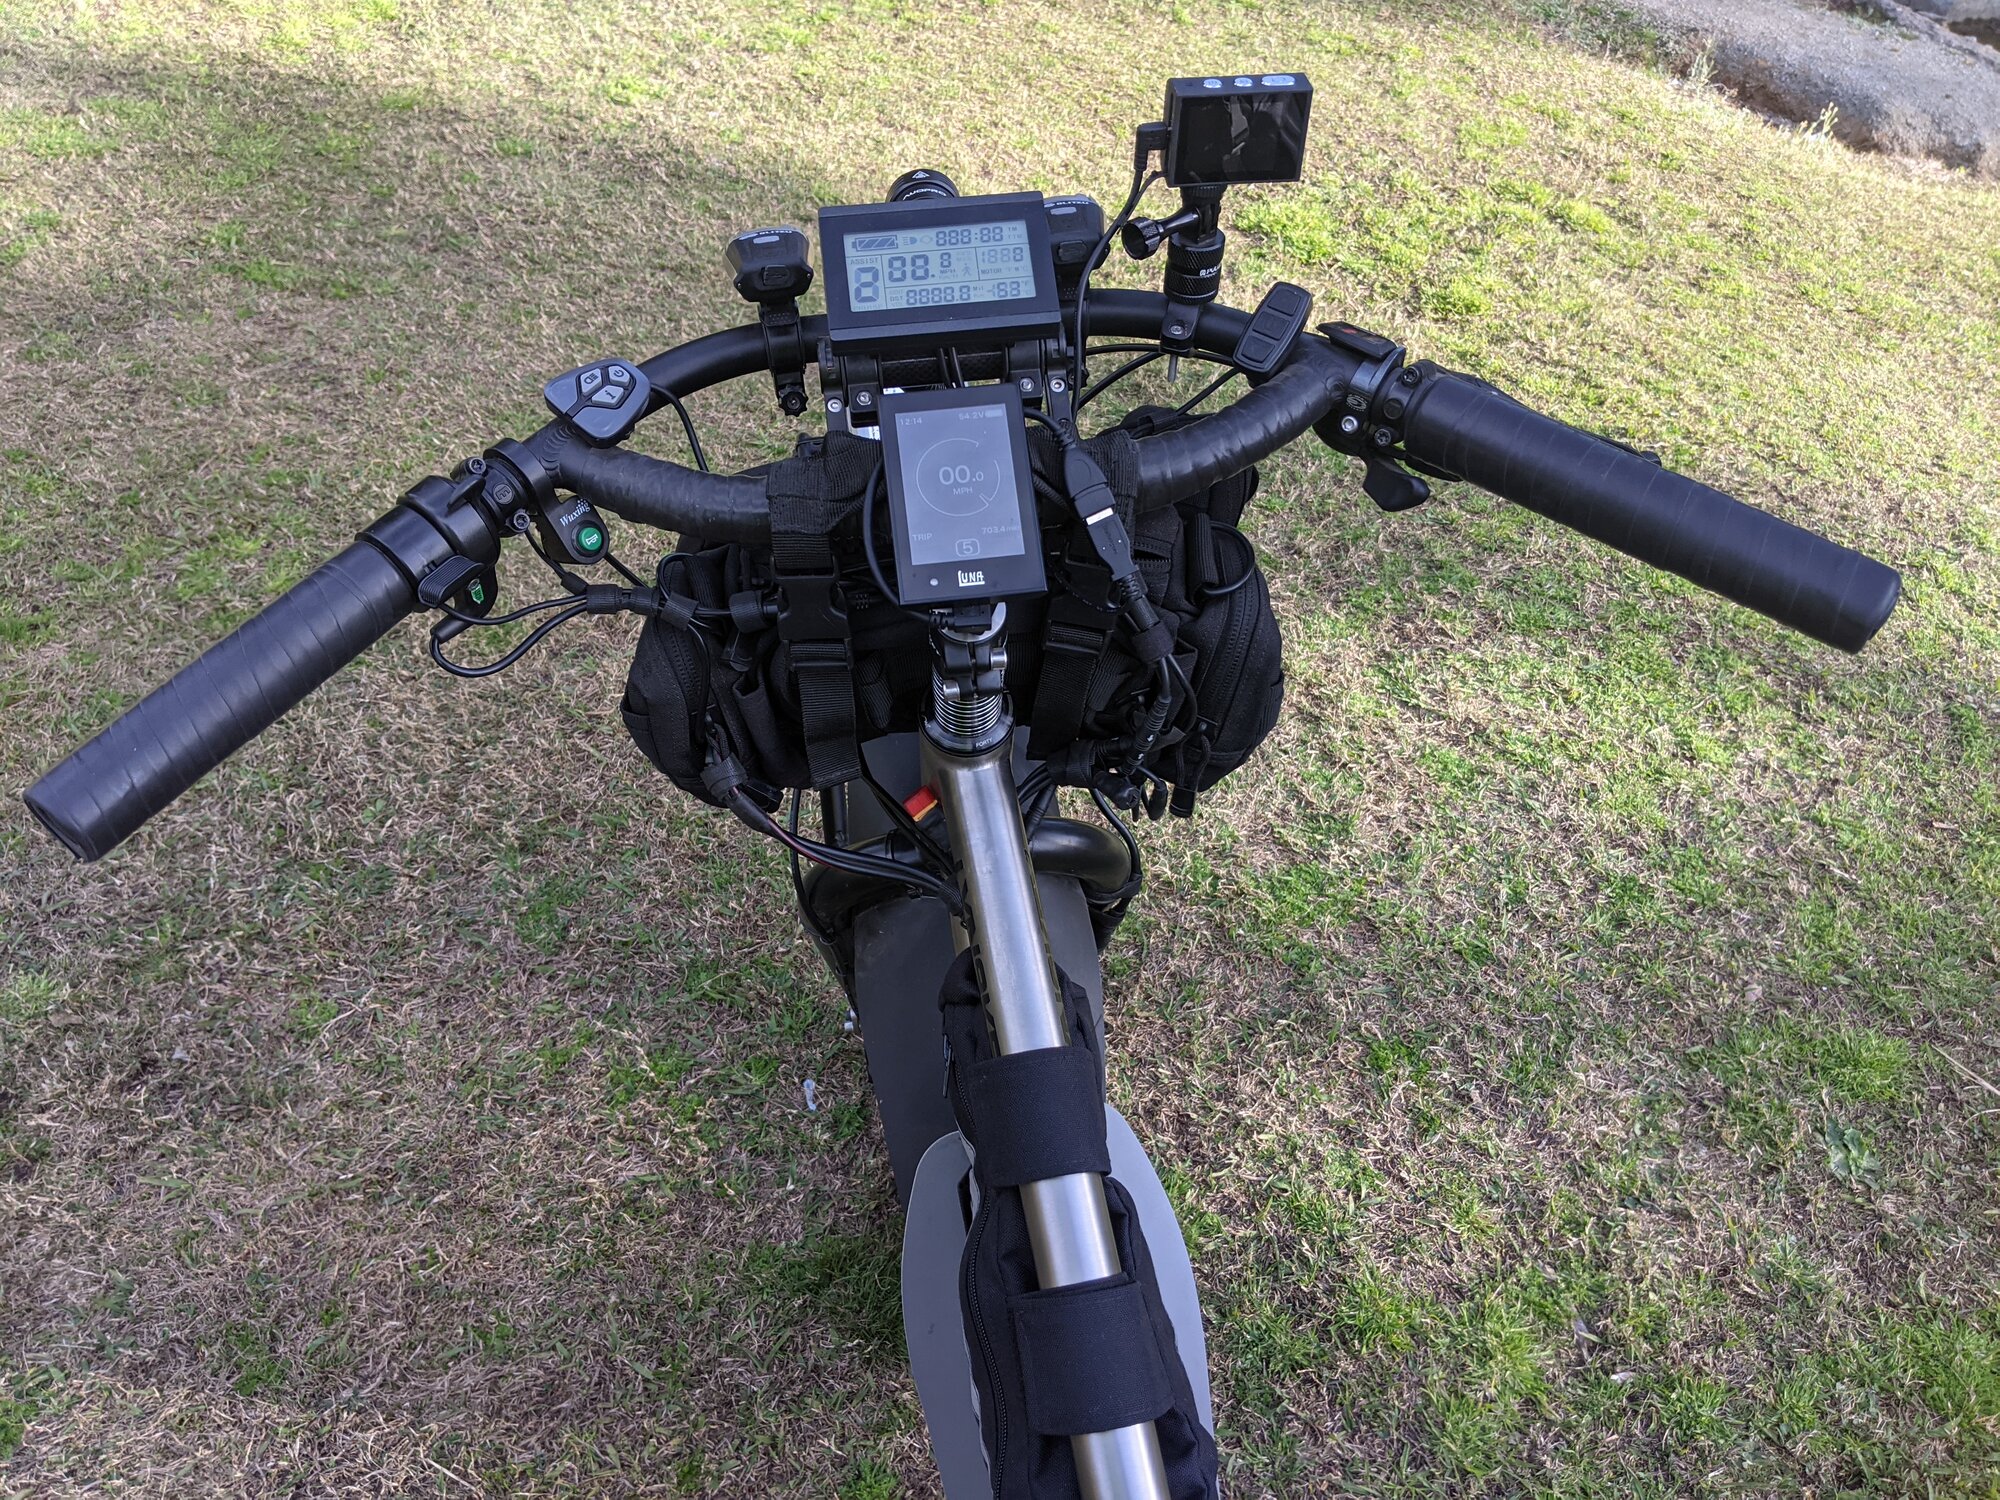 Dash cams for bikes  Electric Bike Forums